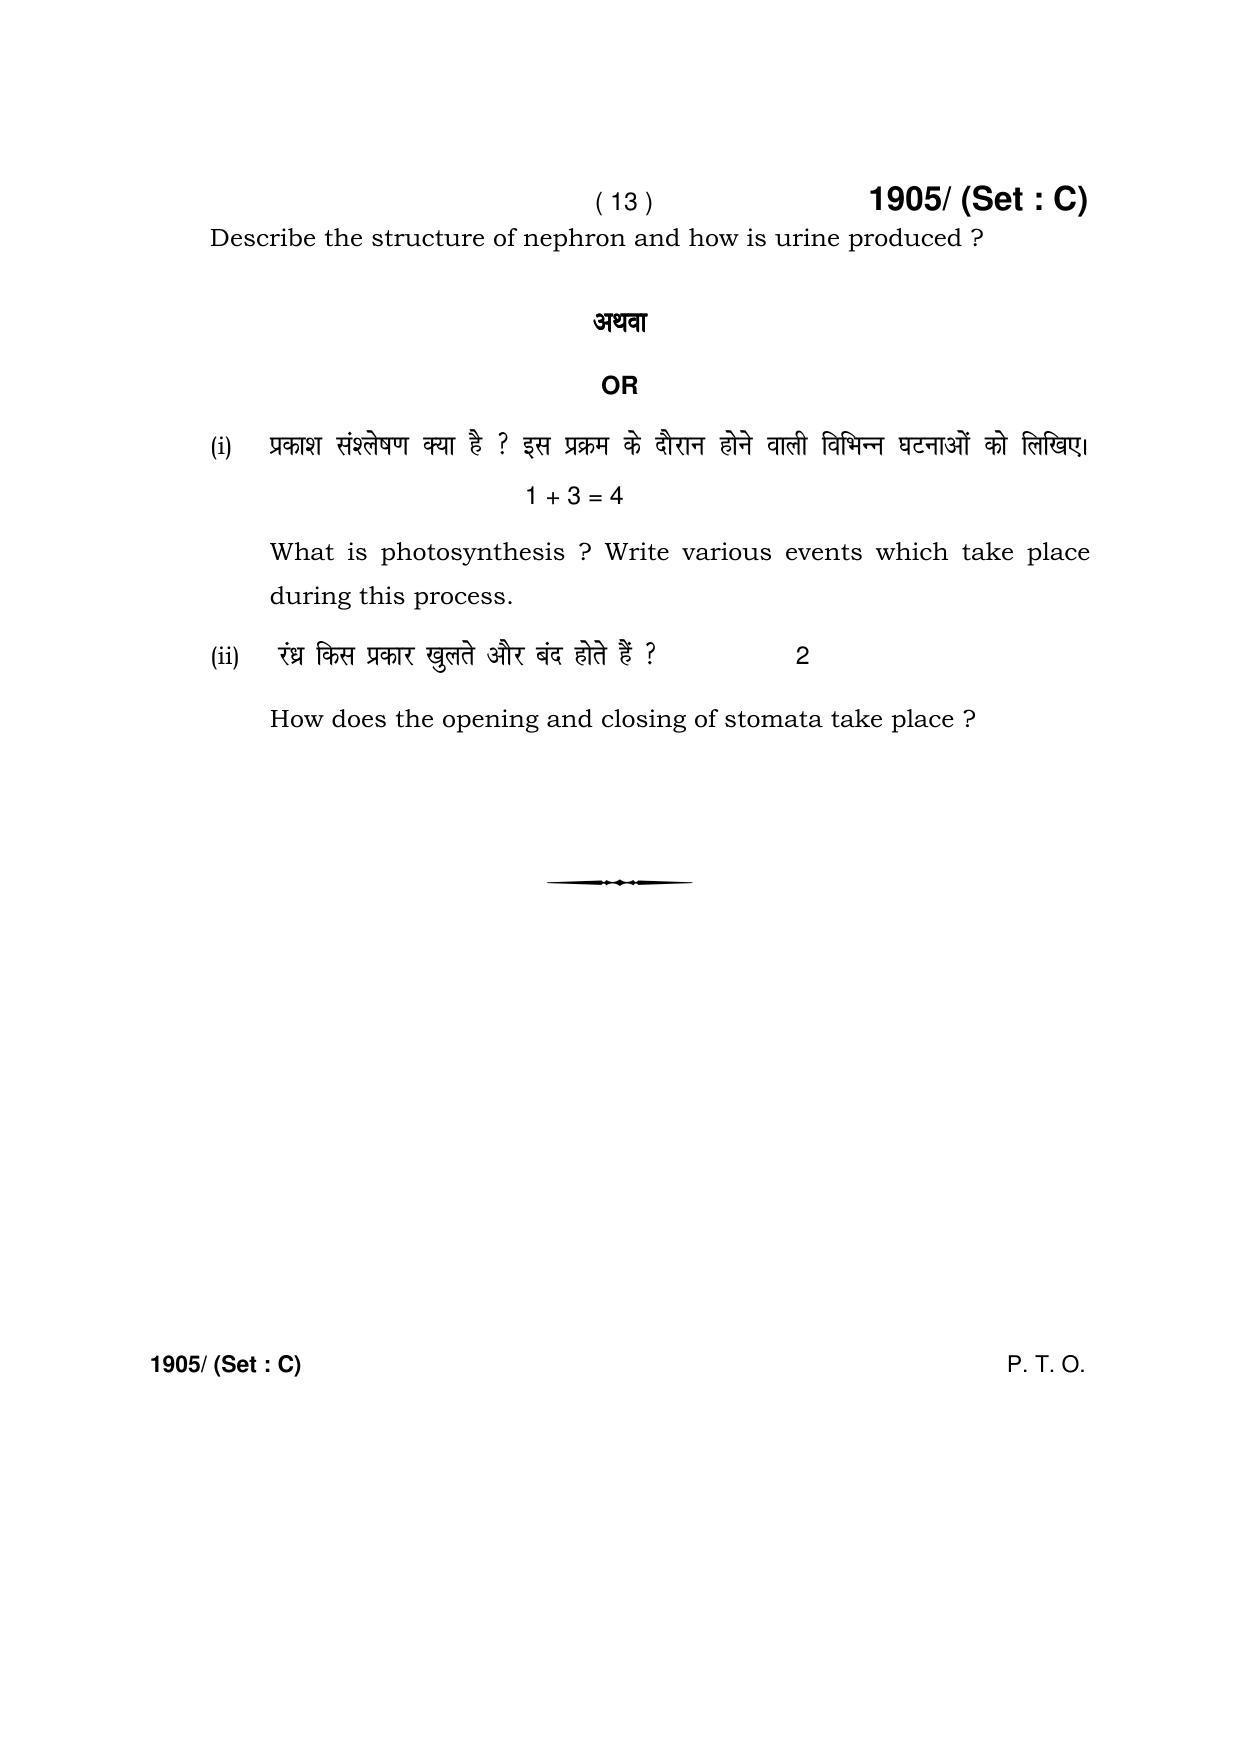 Haryana Board HBSE Class 10 Science -C 2017 Question Paper - Page 13